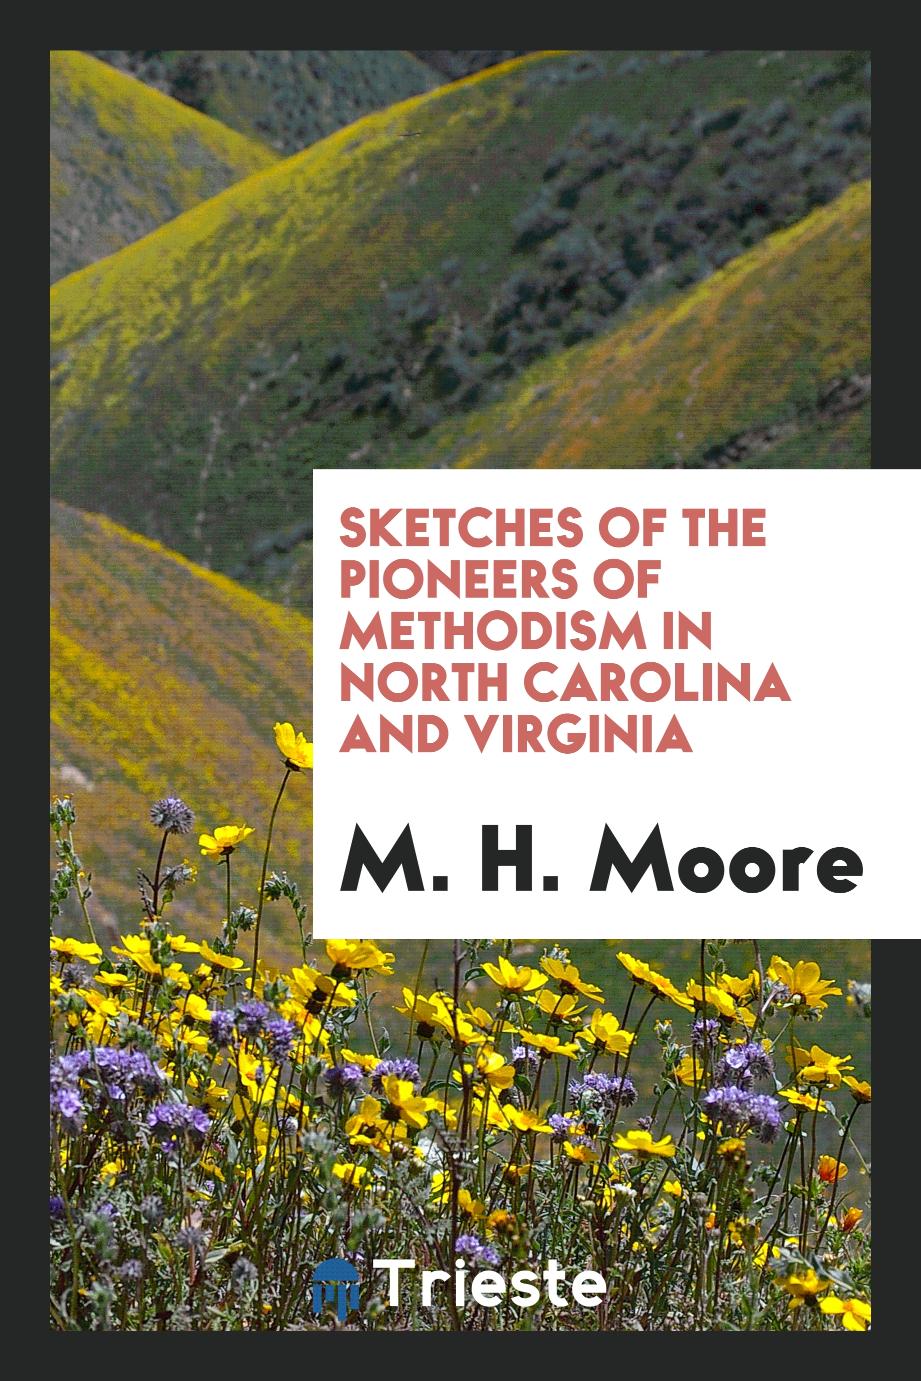 Sketches of the Pioneers of Methodism in North Carolina and Virginia